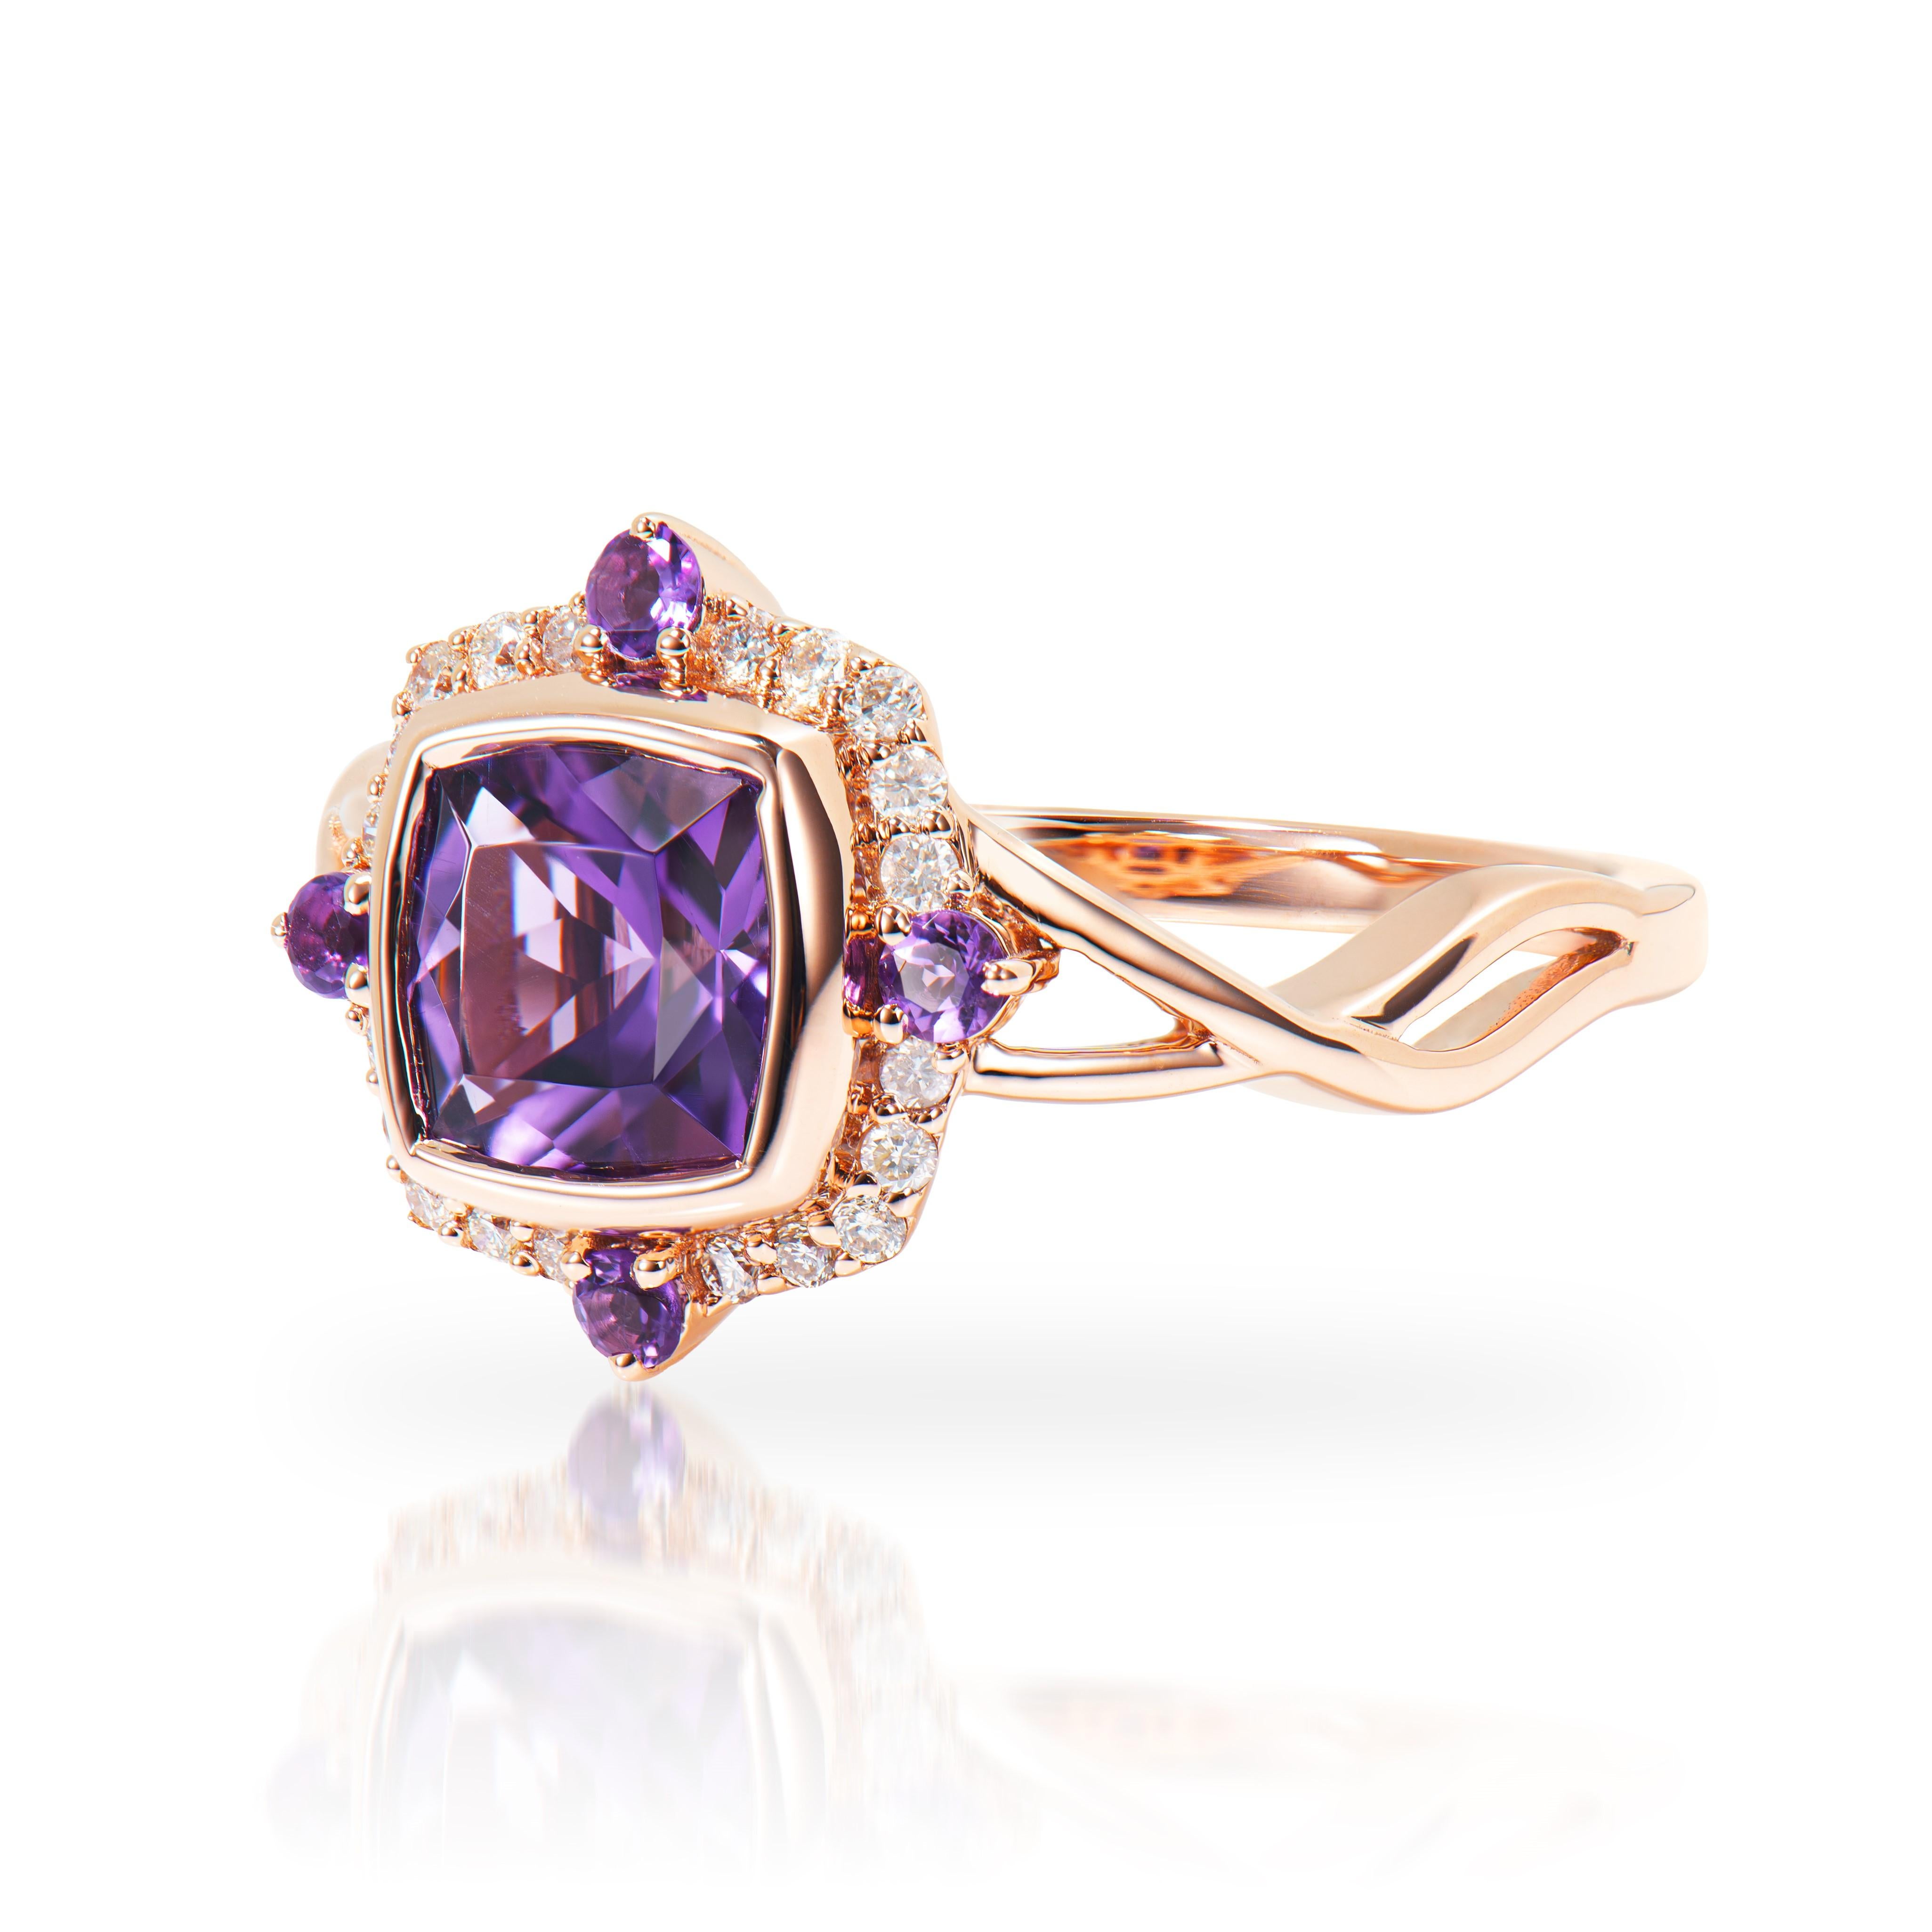 Cushion Cut 1.22 Carat Amethyst Fancy Ring in 14Karat Rose Gold with White Diamond.   For Sale